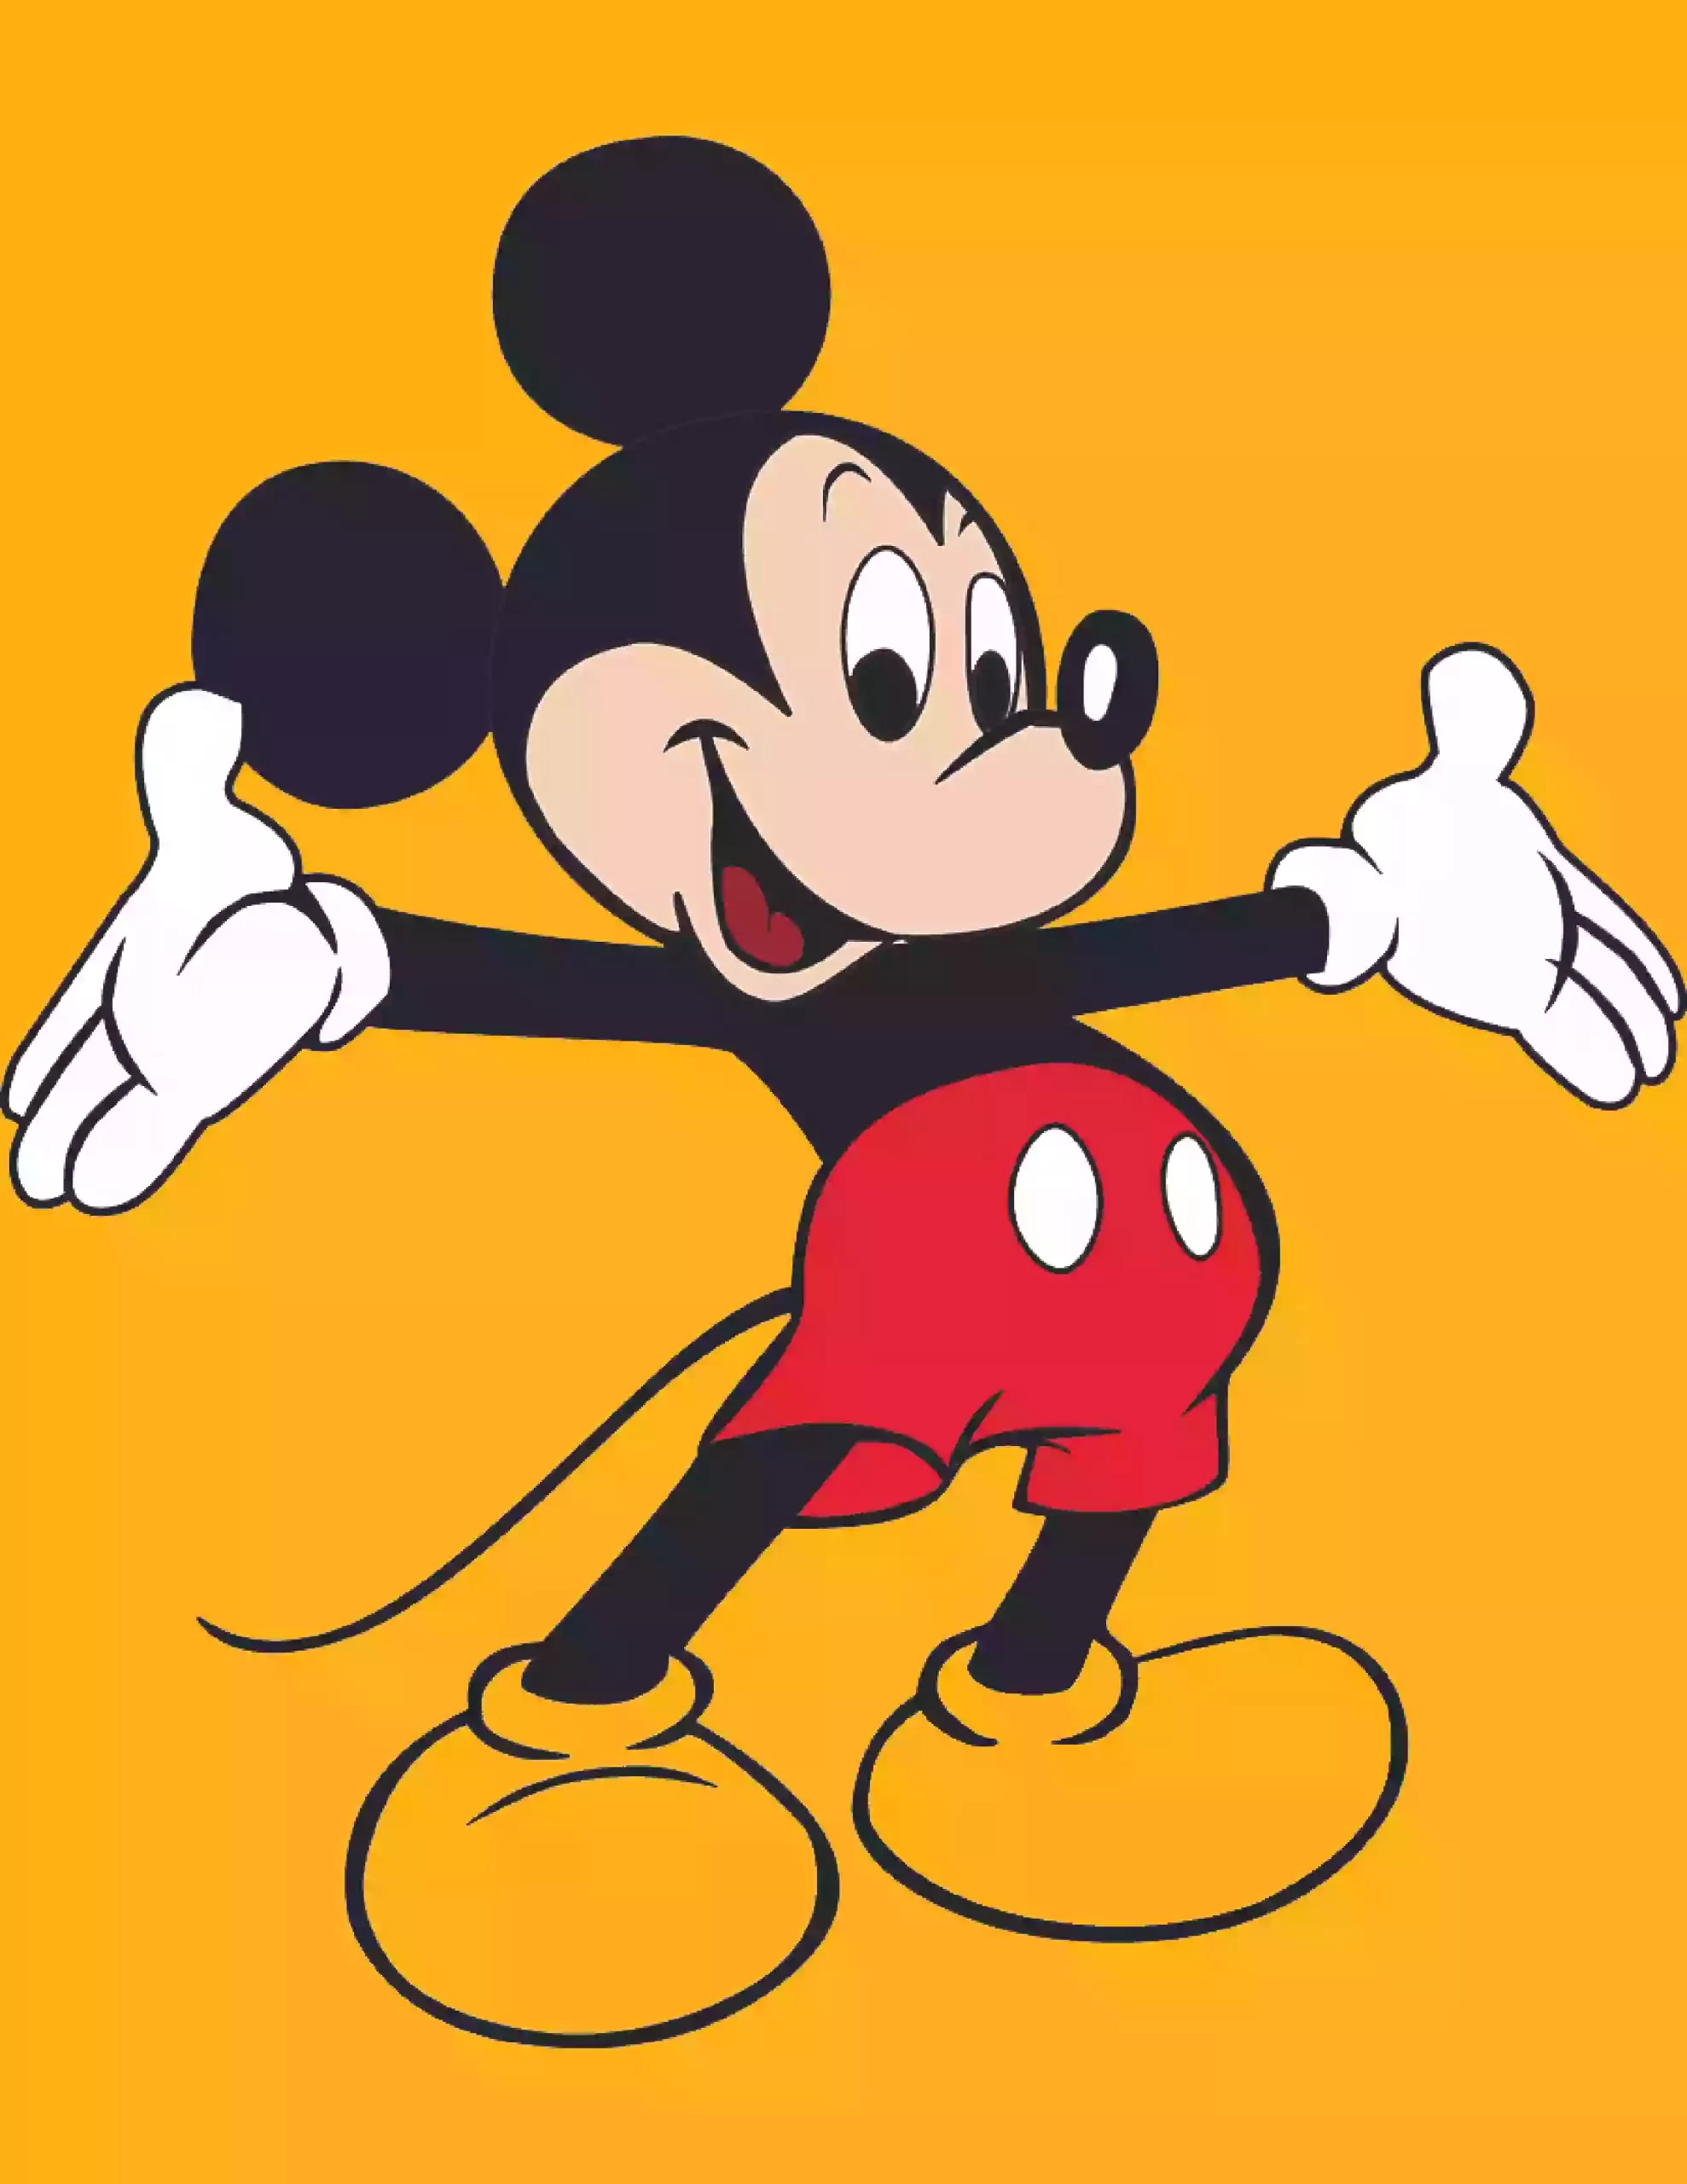 How To Draw Mickey Mouse | Step By Step Drawing Tutorials | Storiespub-saigonsouth.com.vn